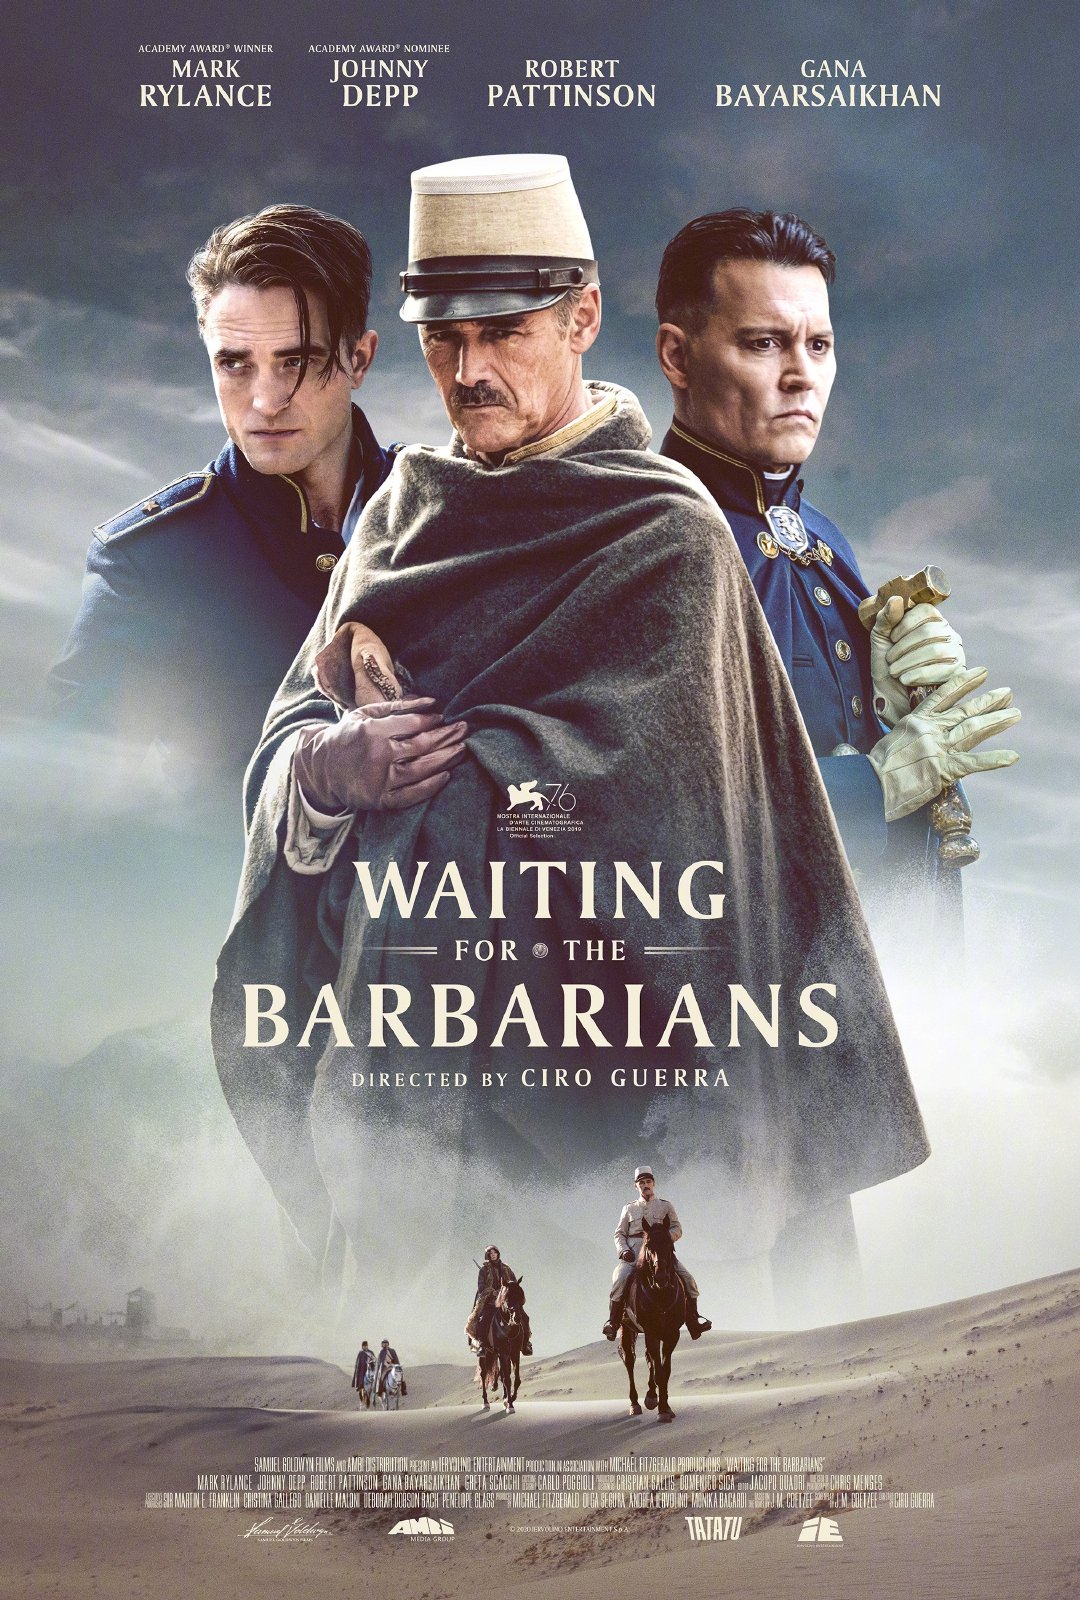 ȴҰ Waiting.for.the.Barbarians.2019.1080p.BluRay.x264.DTS-NOGRP 8.62GB-1.jpeg